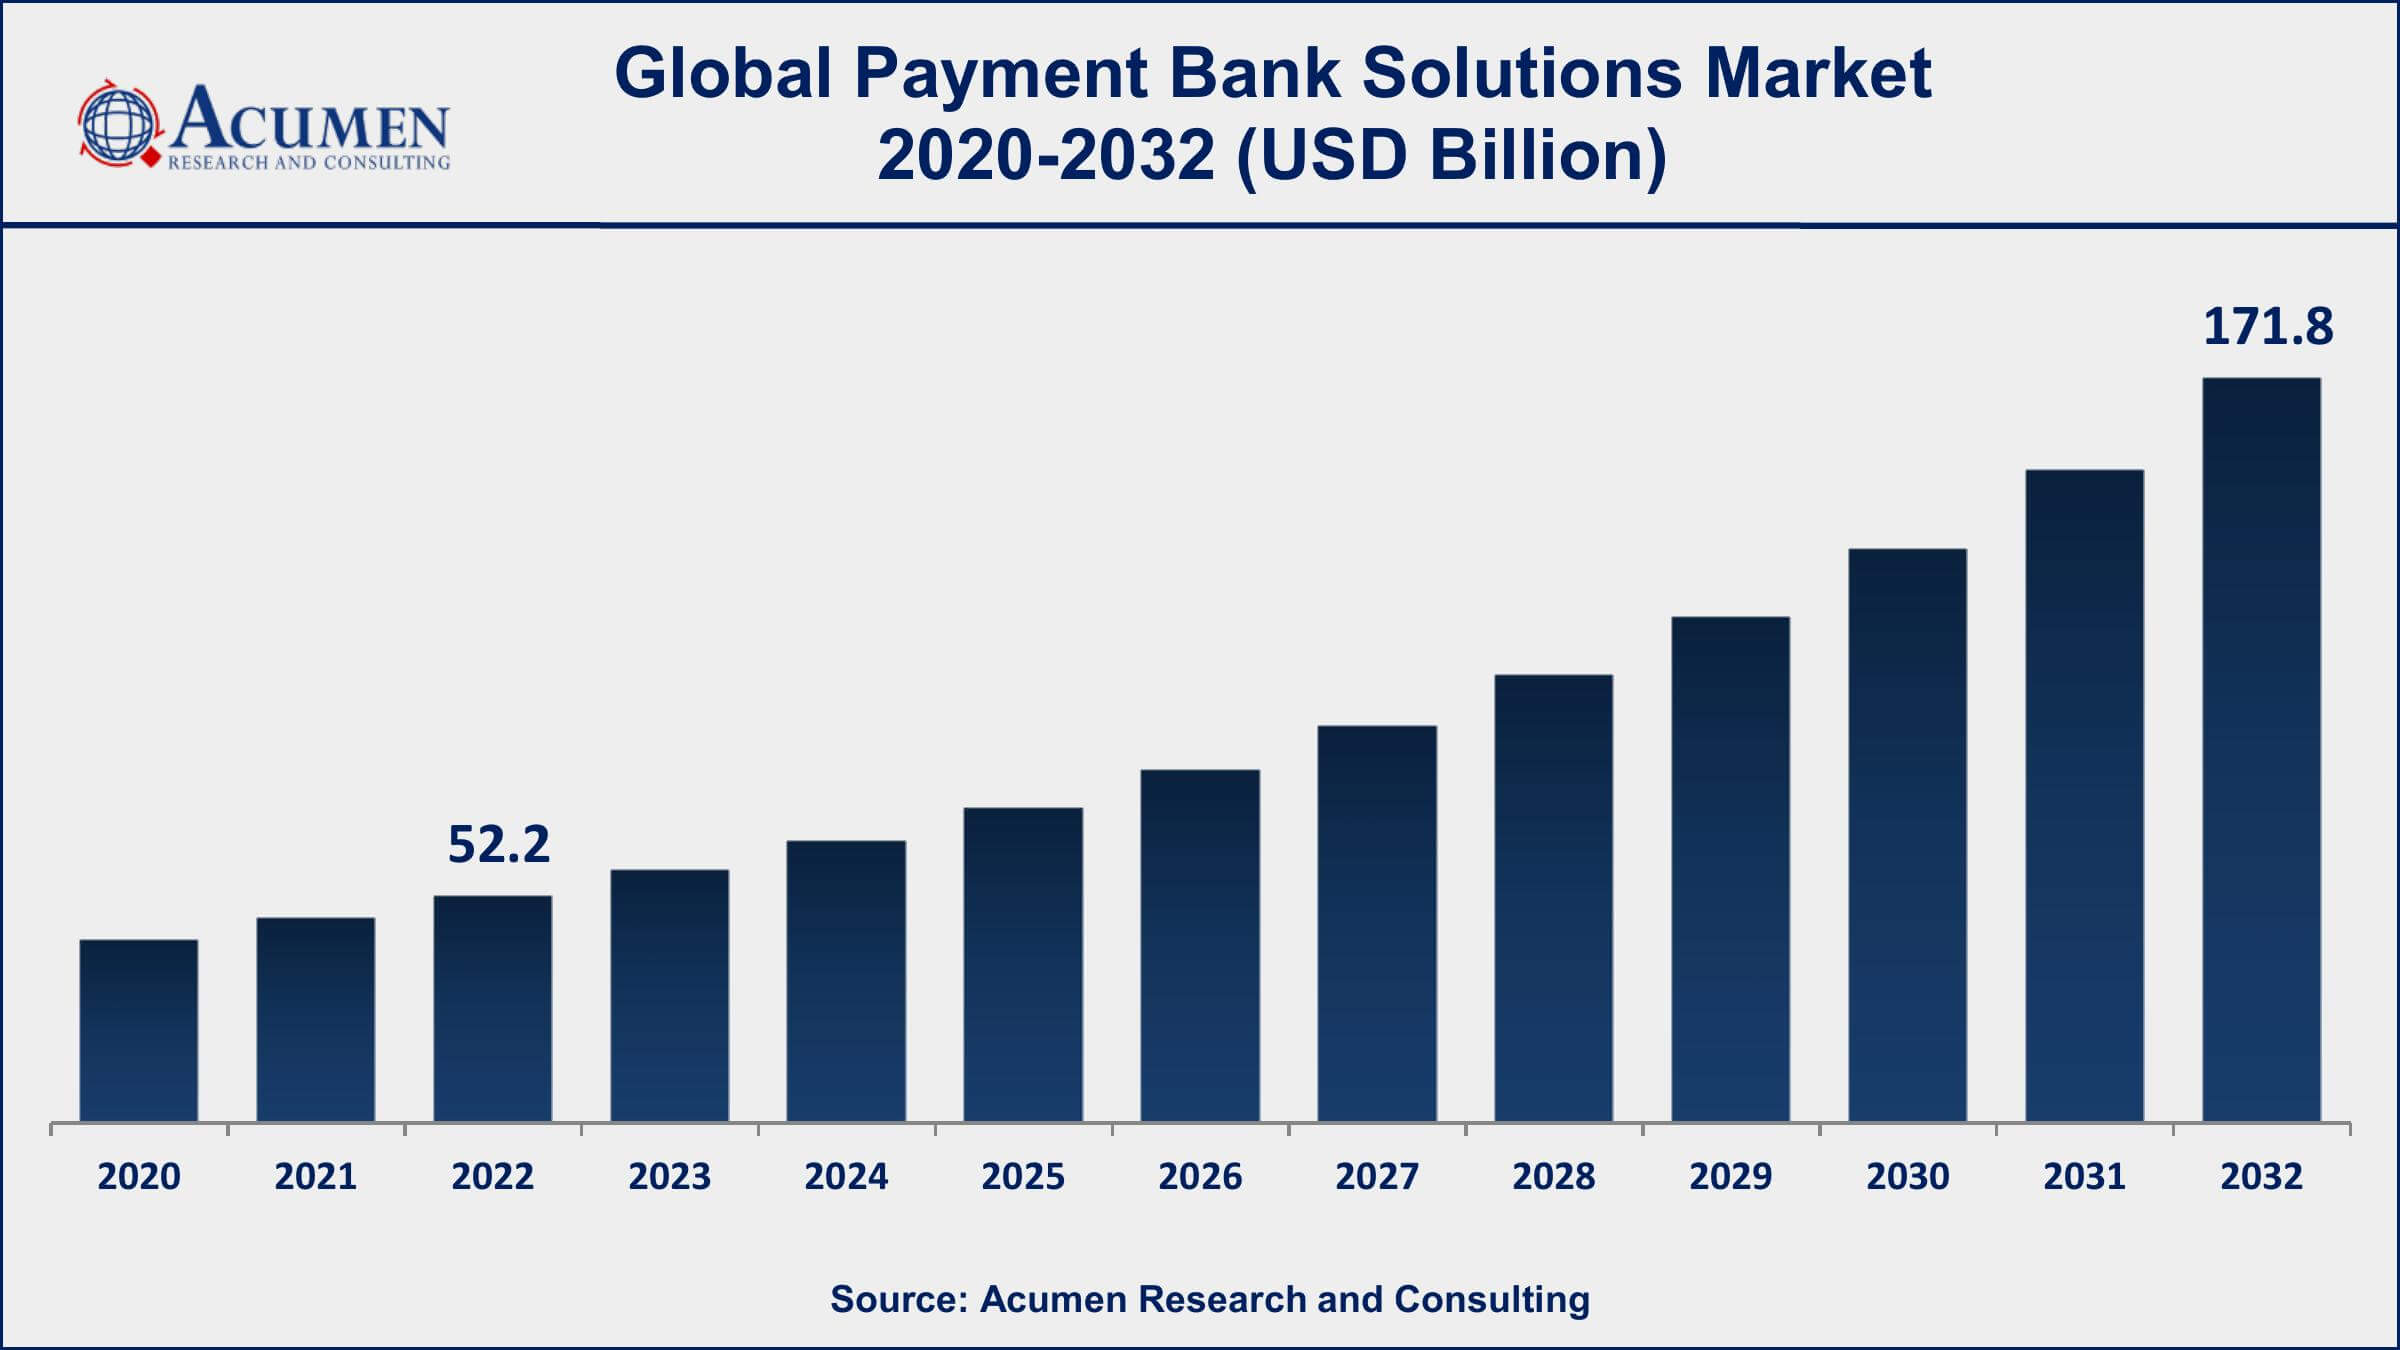 Payment Bank Solutions Market Drivers